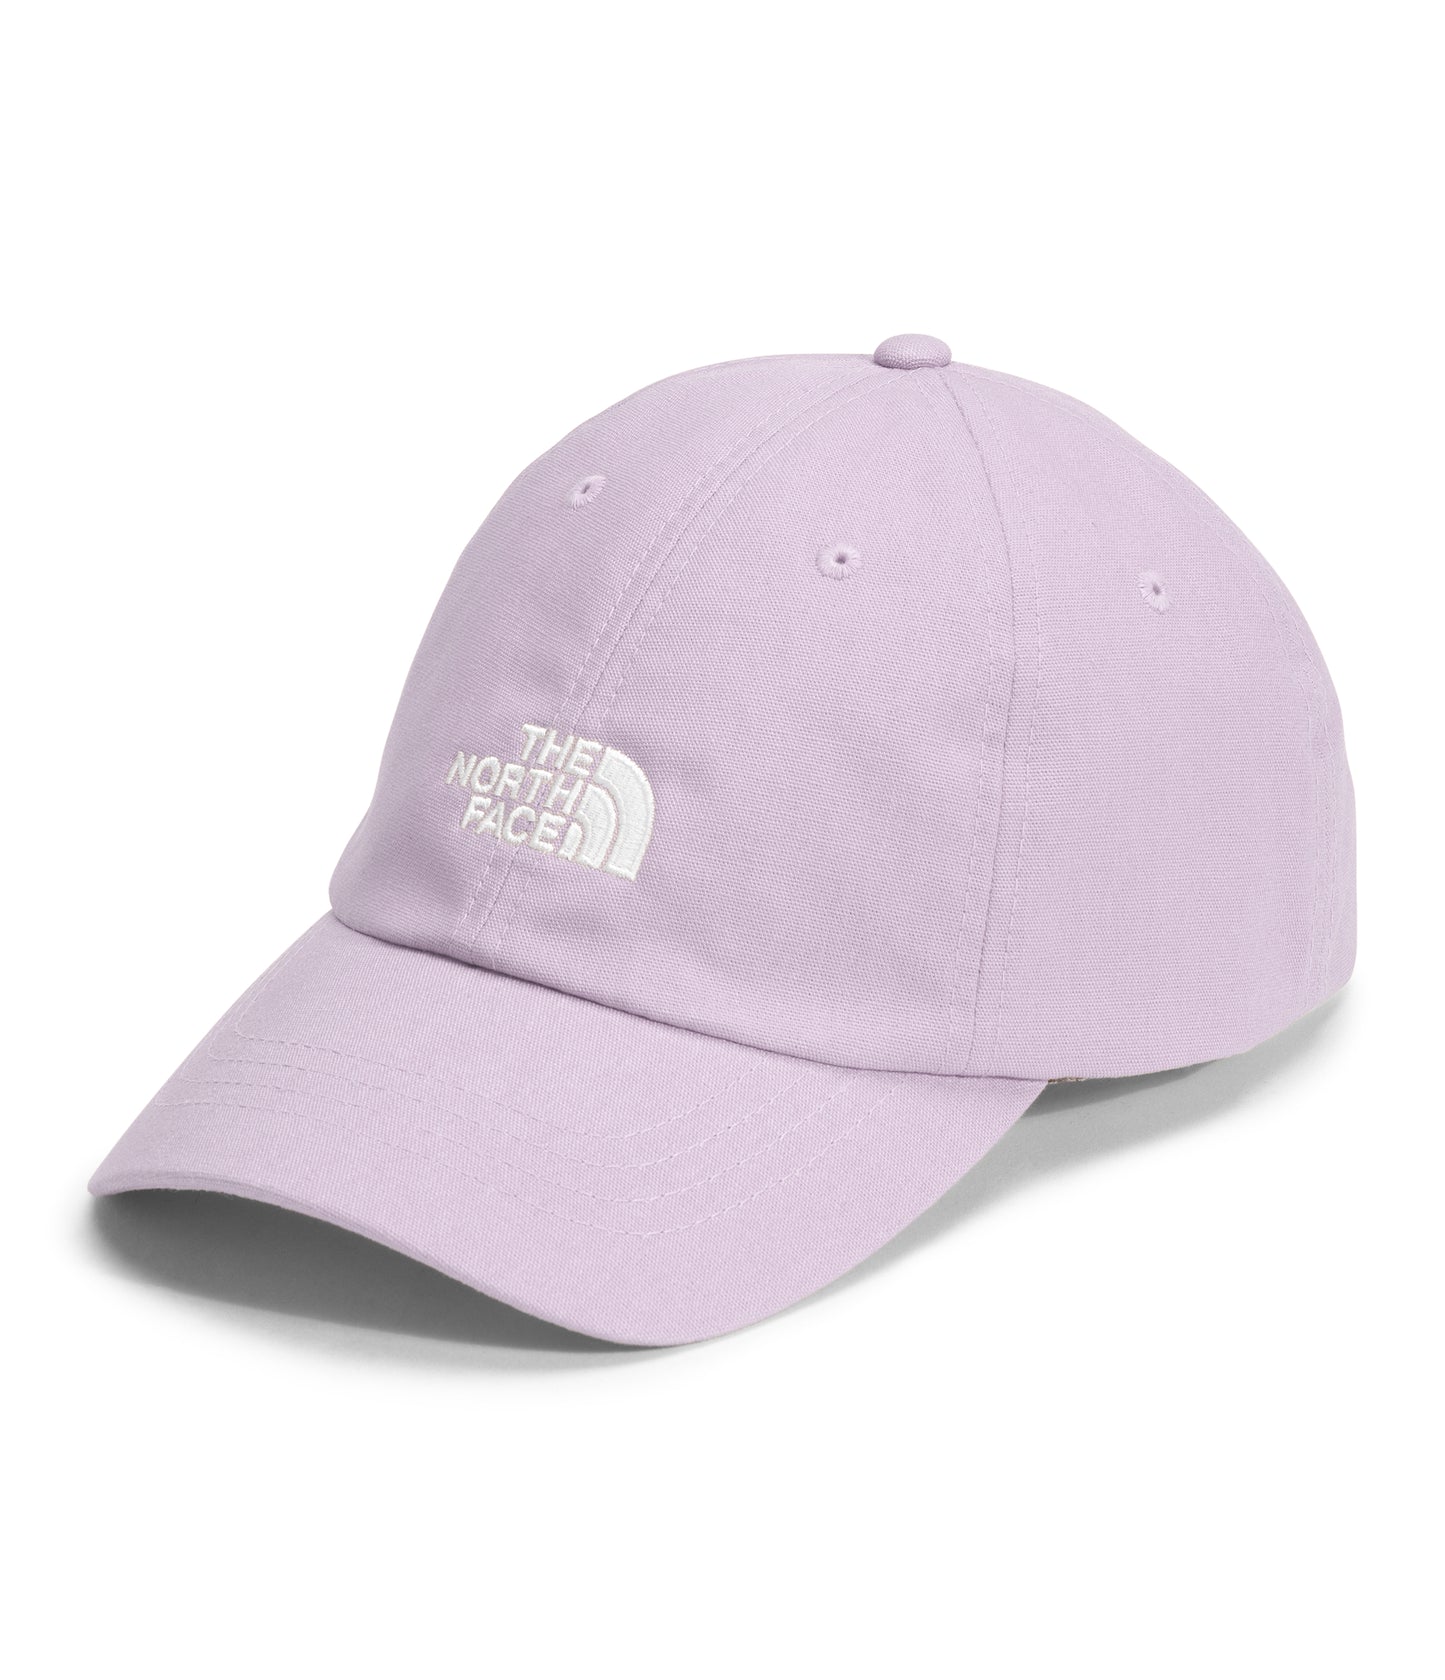 GORRA / NORM / THE NORTH FACE